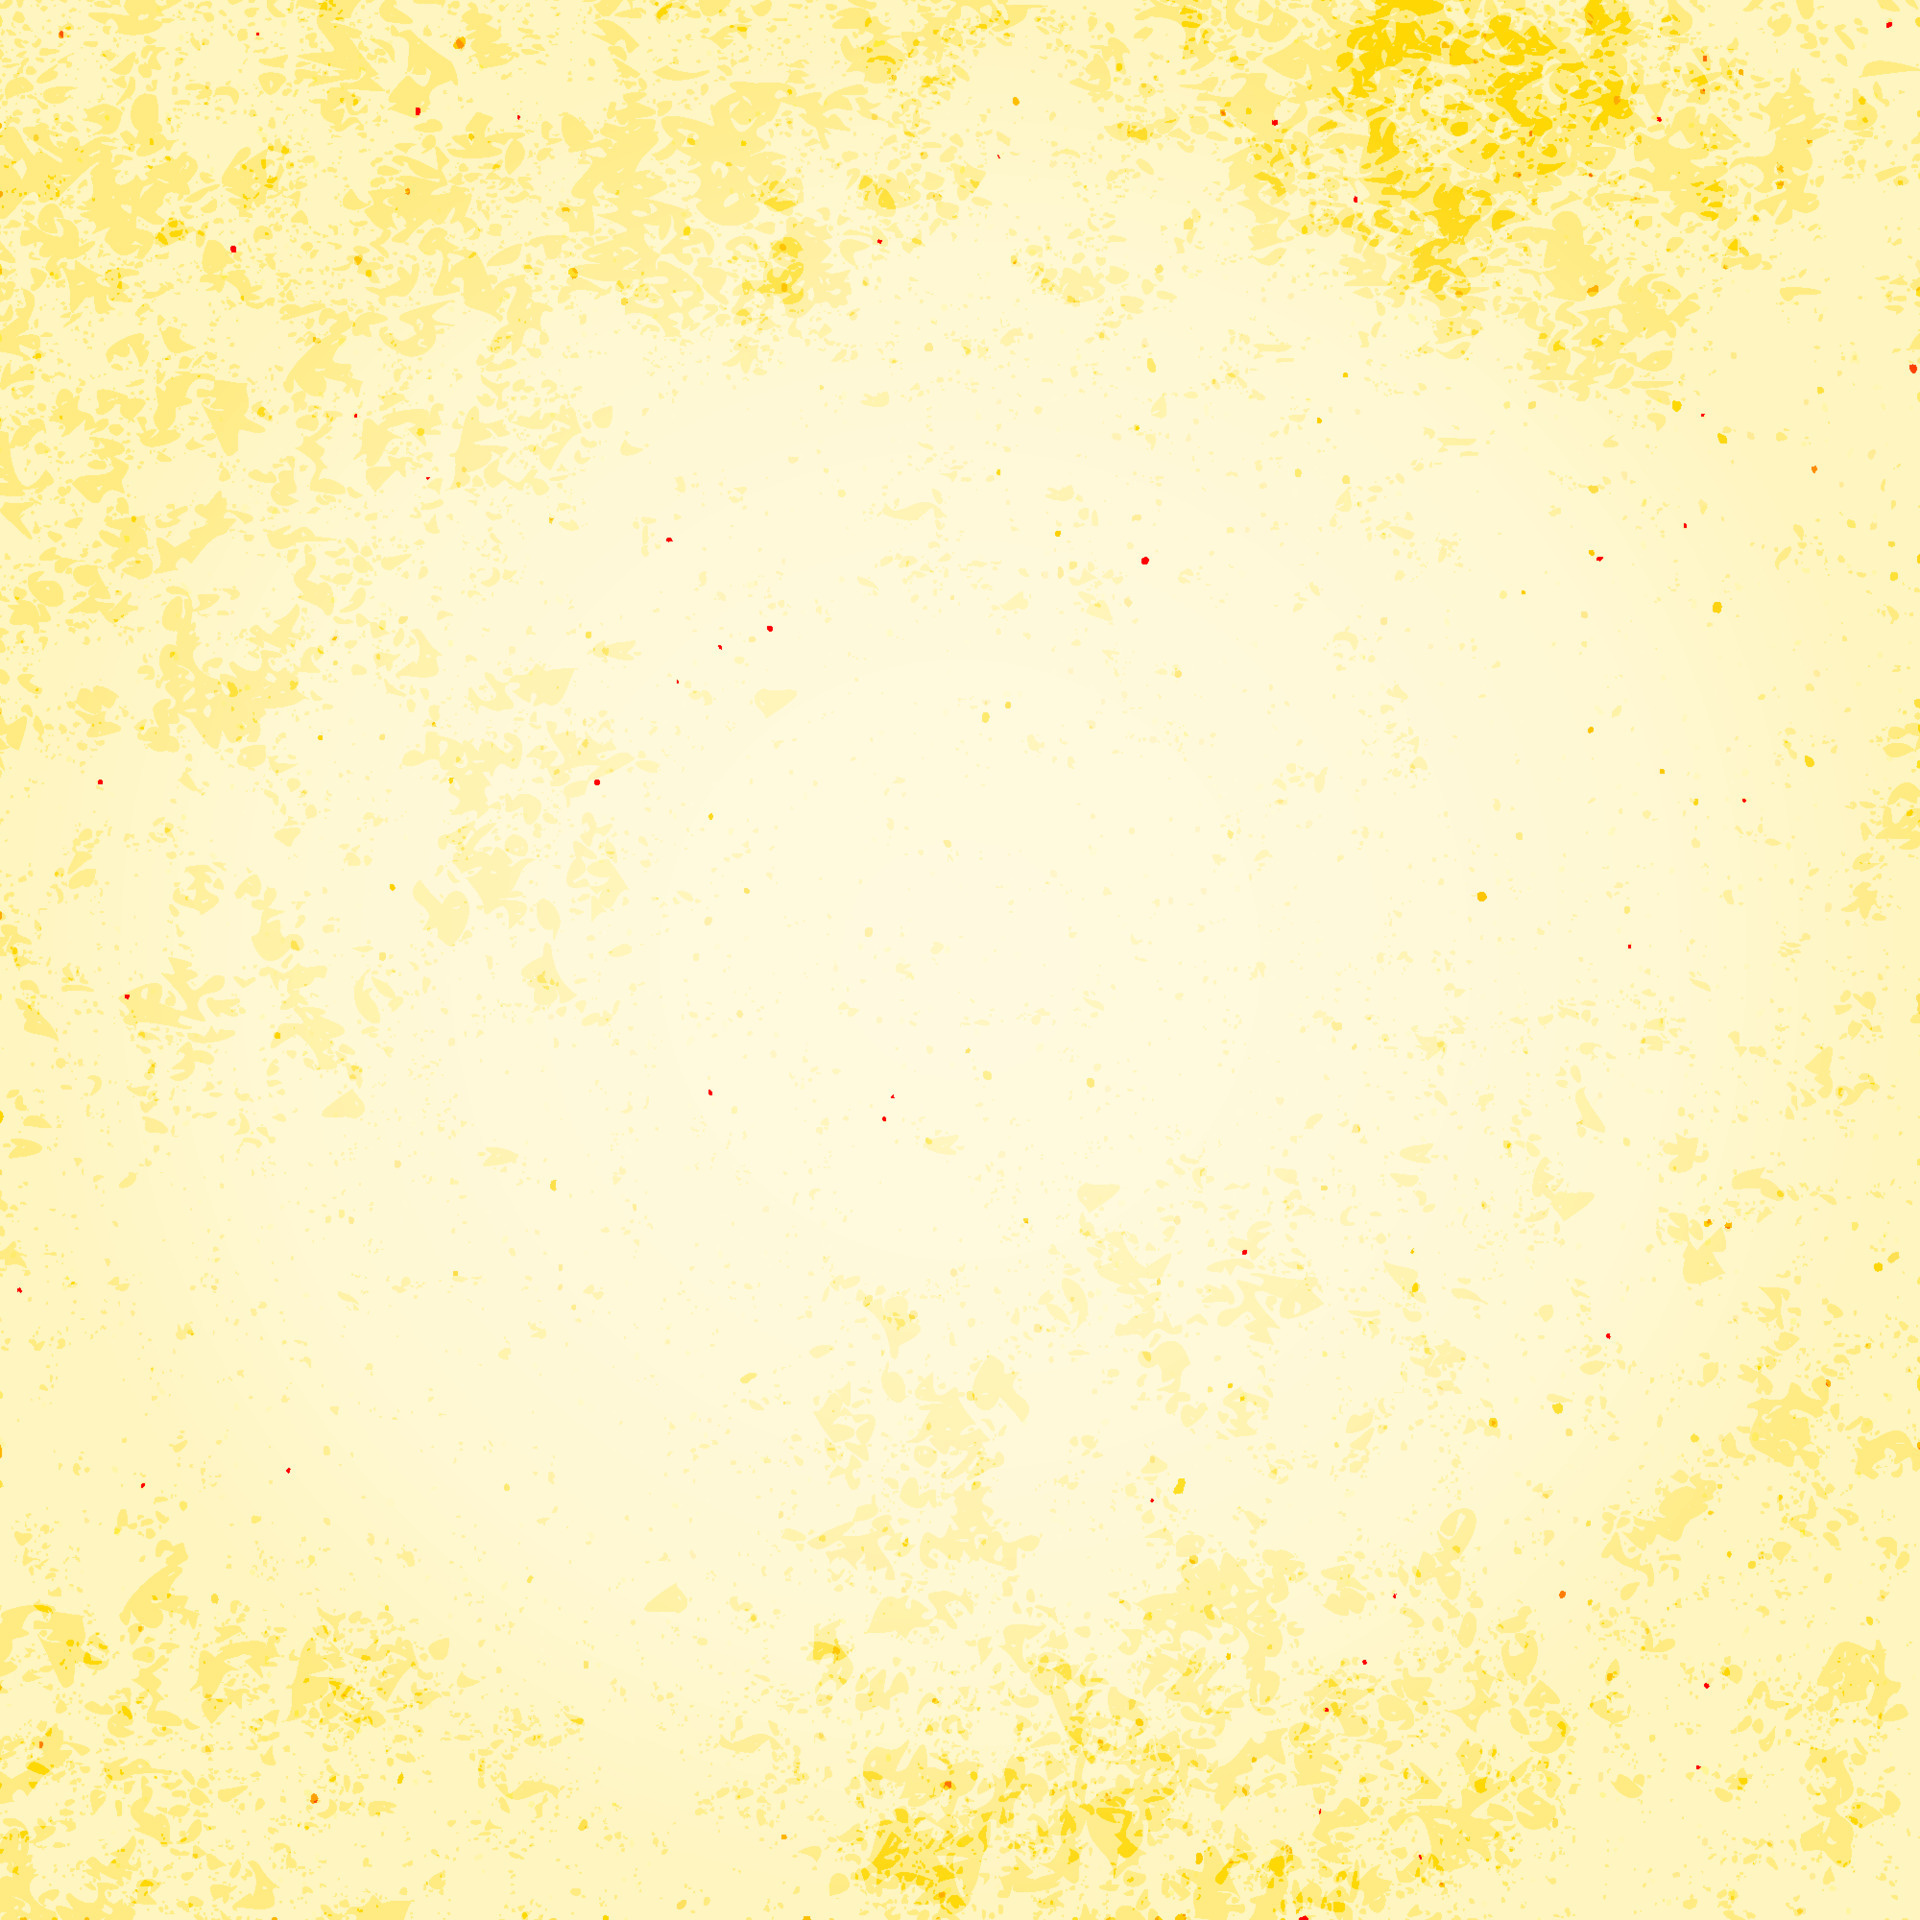 old yellow paper background. vintage book page texture, space for